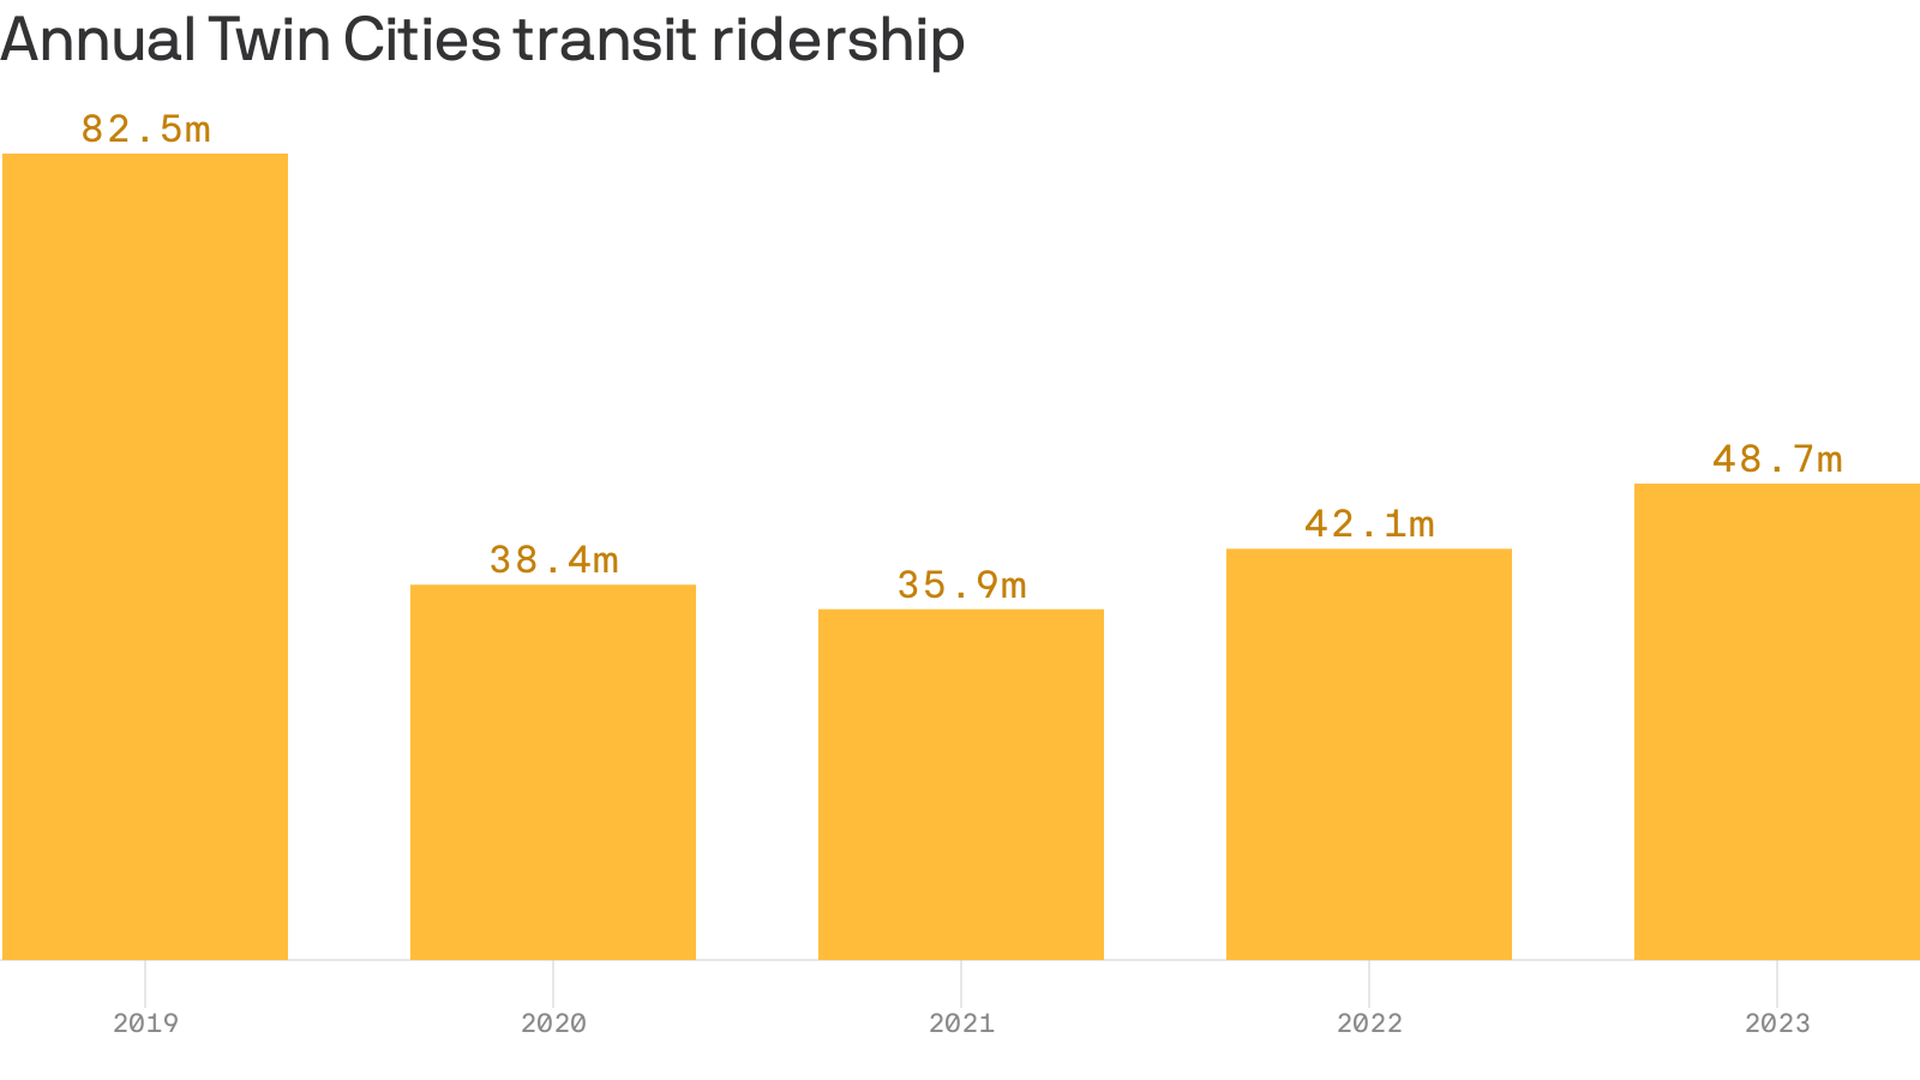 Column chart showing a significant drop in Twin Cities annual transit ridership from 2019 to 2021, with a gradual increase in 2022 and 2023.